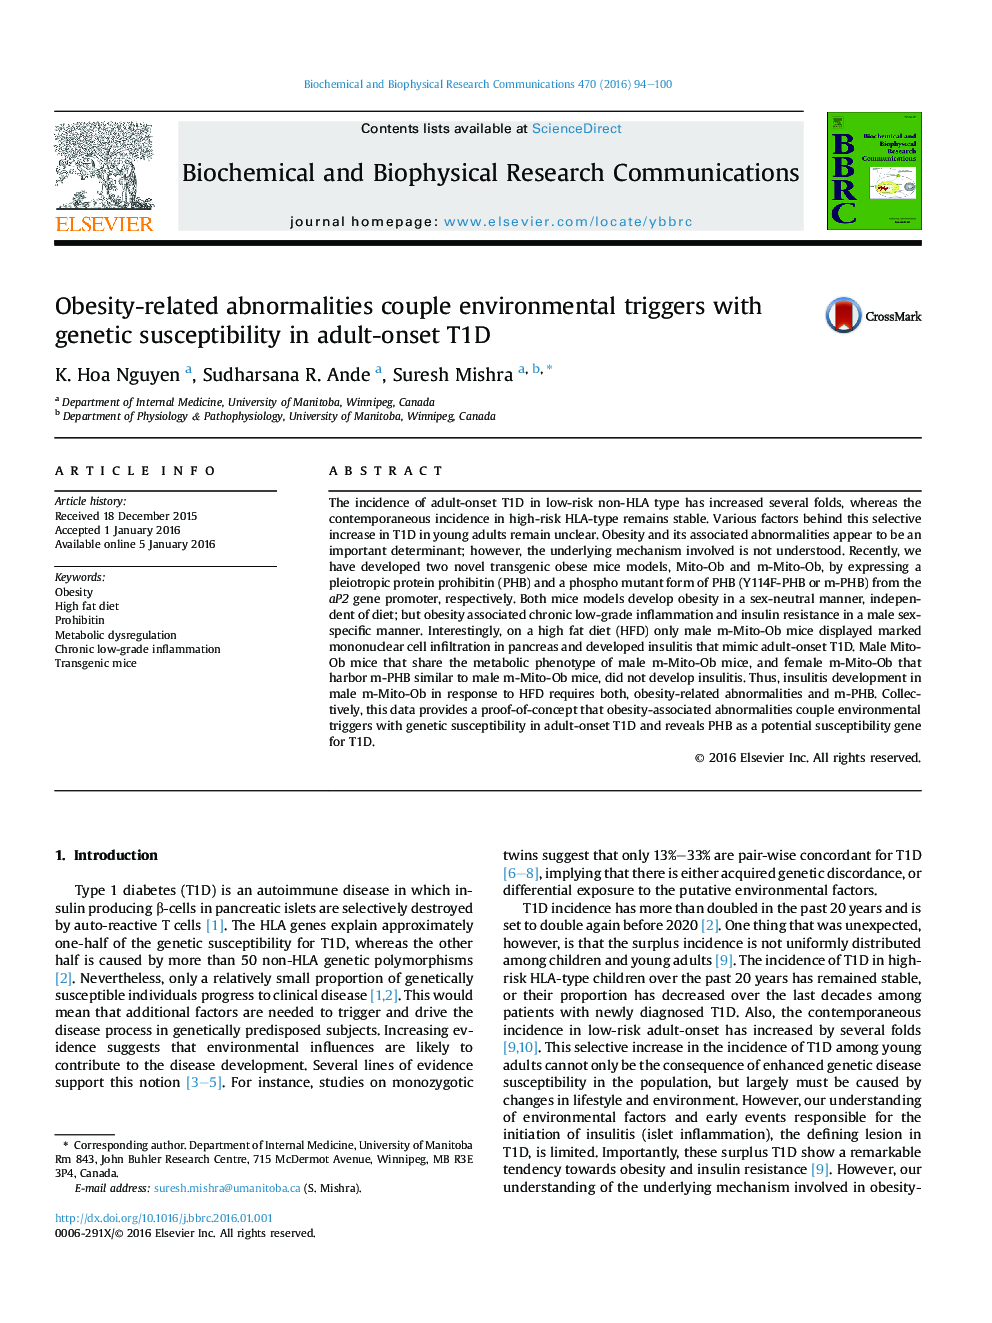 Obesity-related abnormalities couple environmental triggers with genetic susceptibility in adult-onset T1D